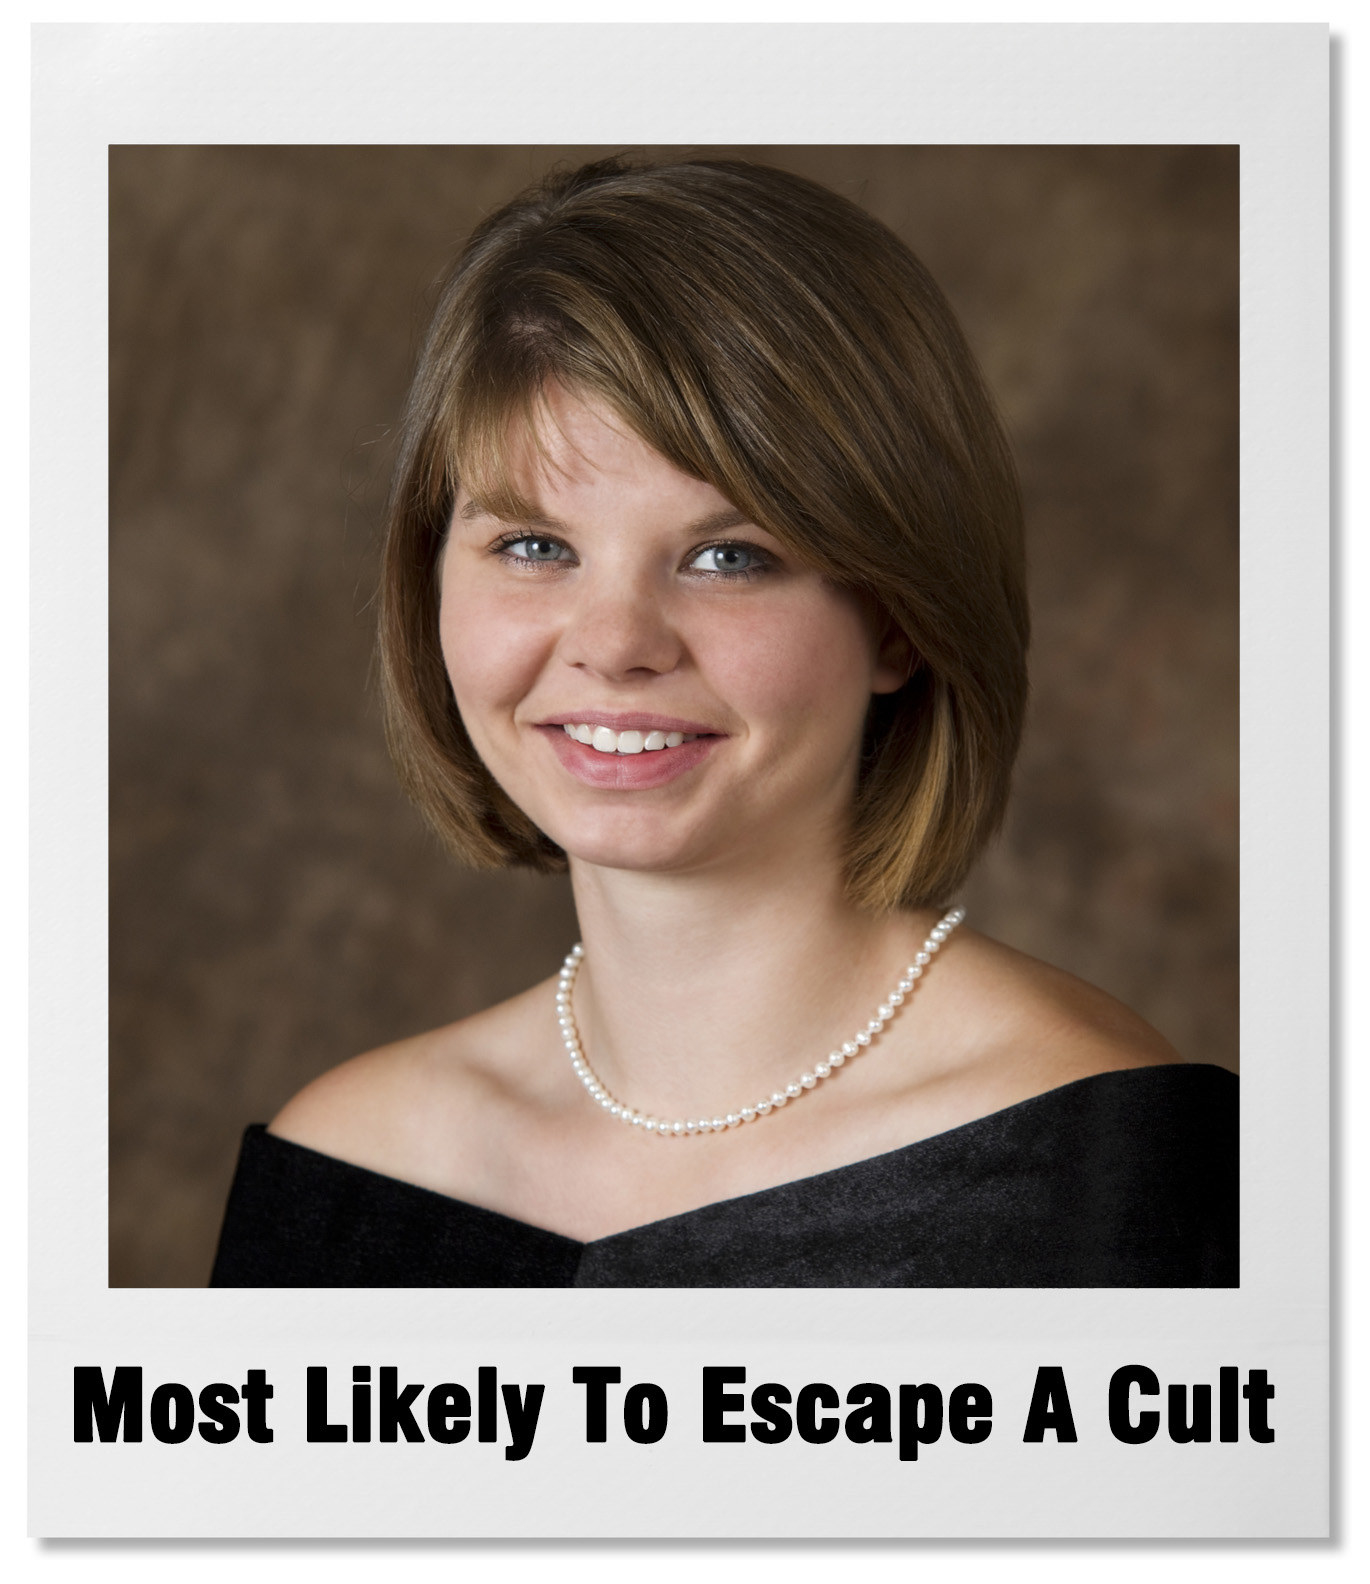 yearbook photo with text &#x27;most likely to escape a cult&#x27;